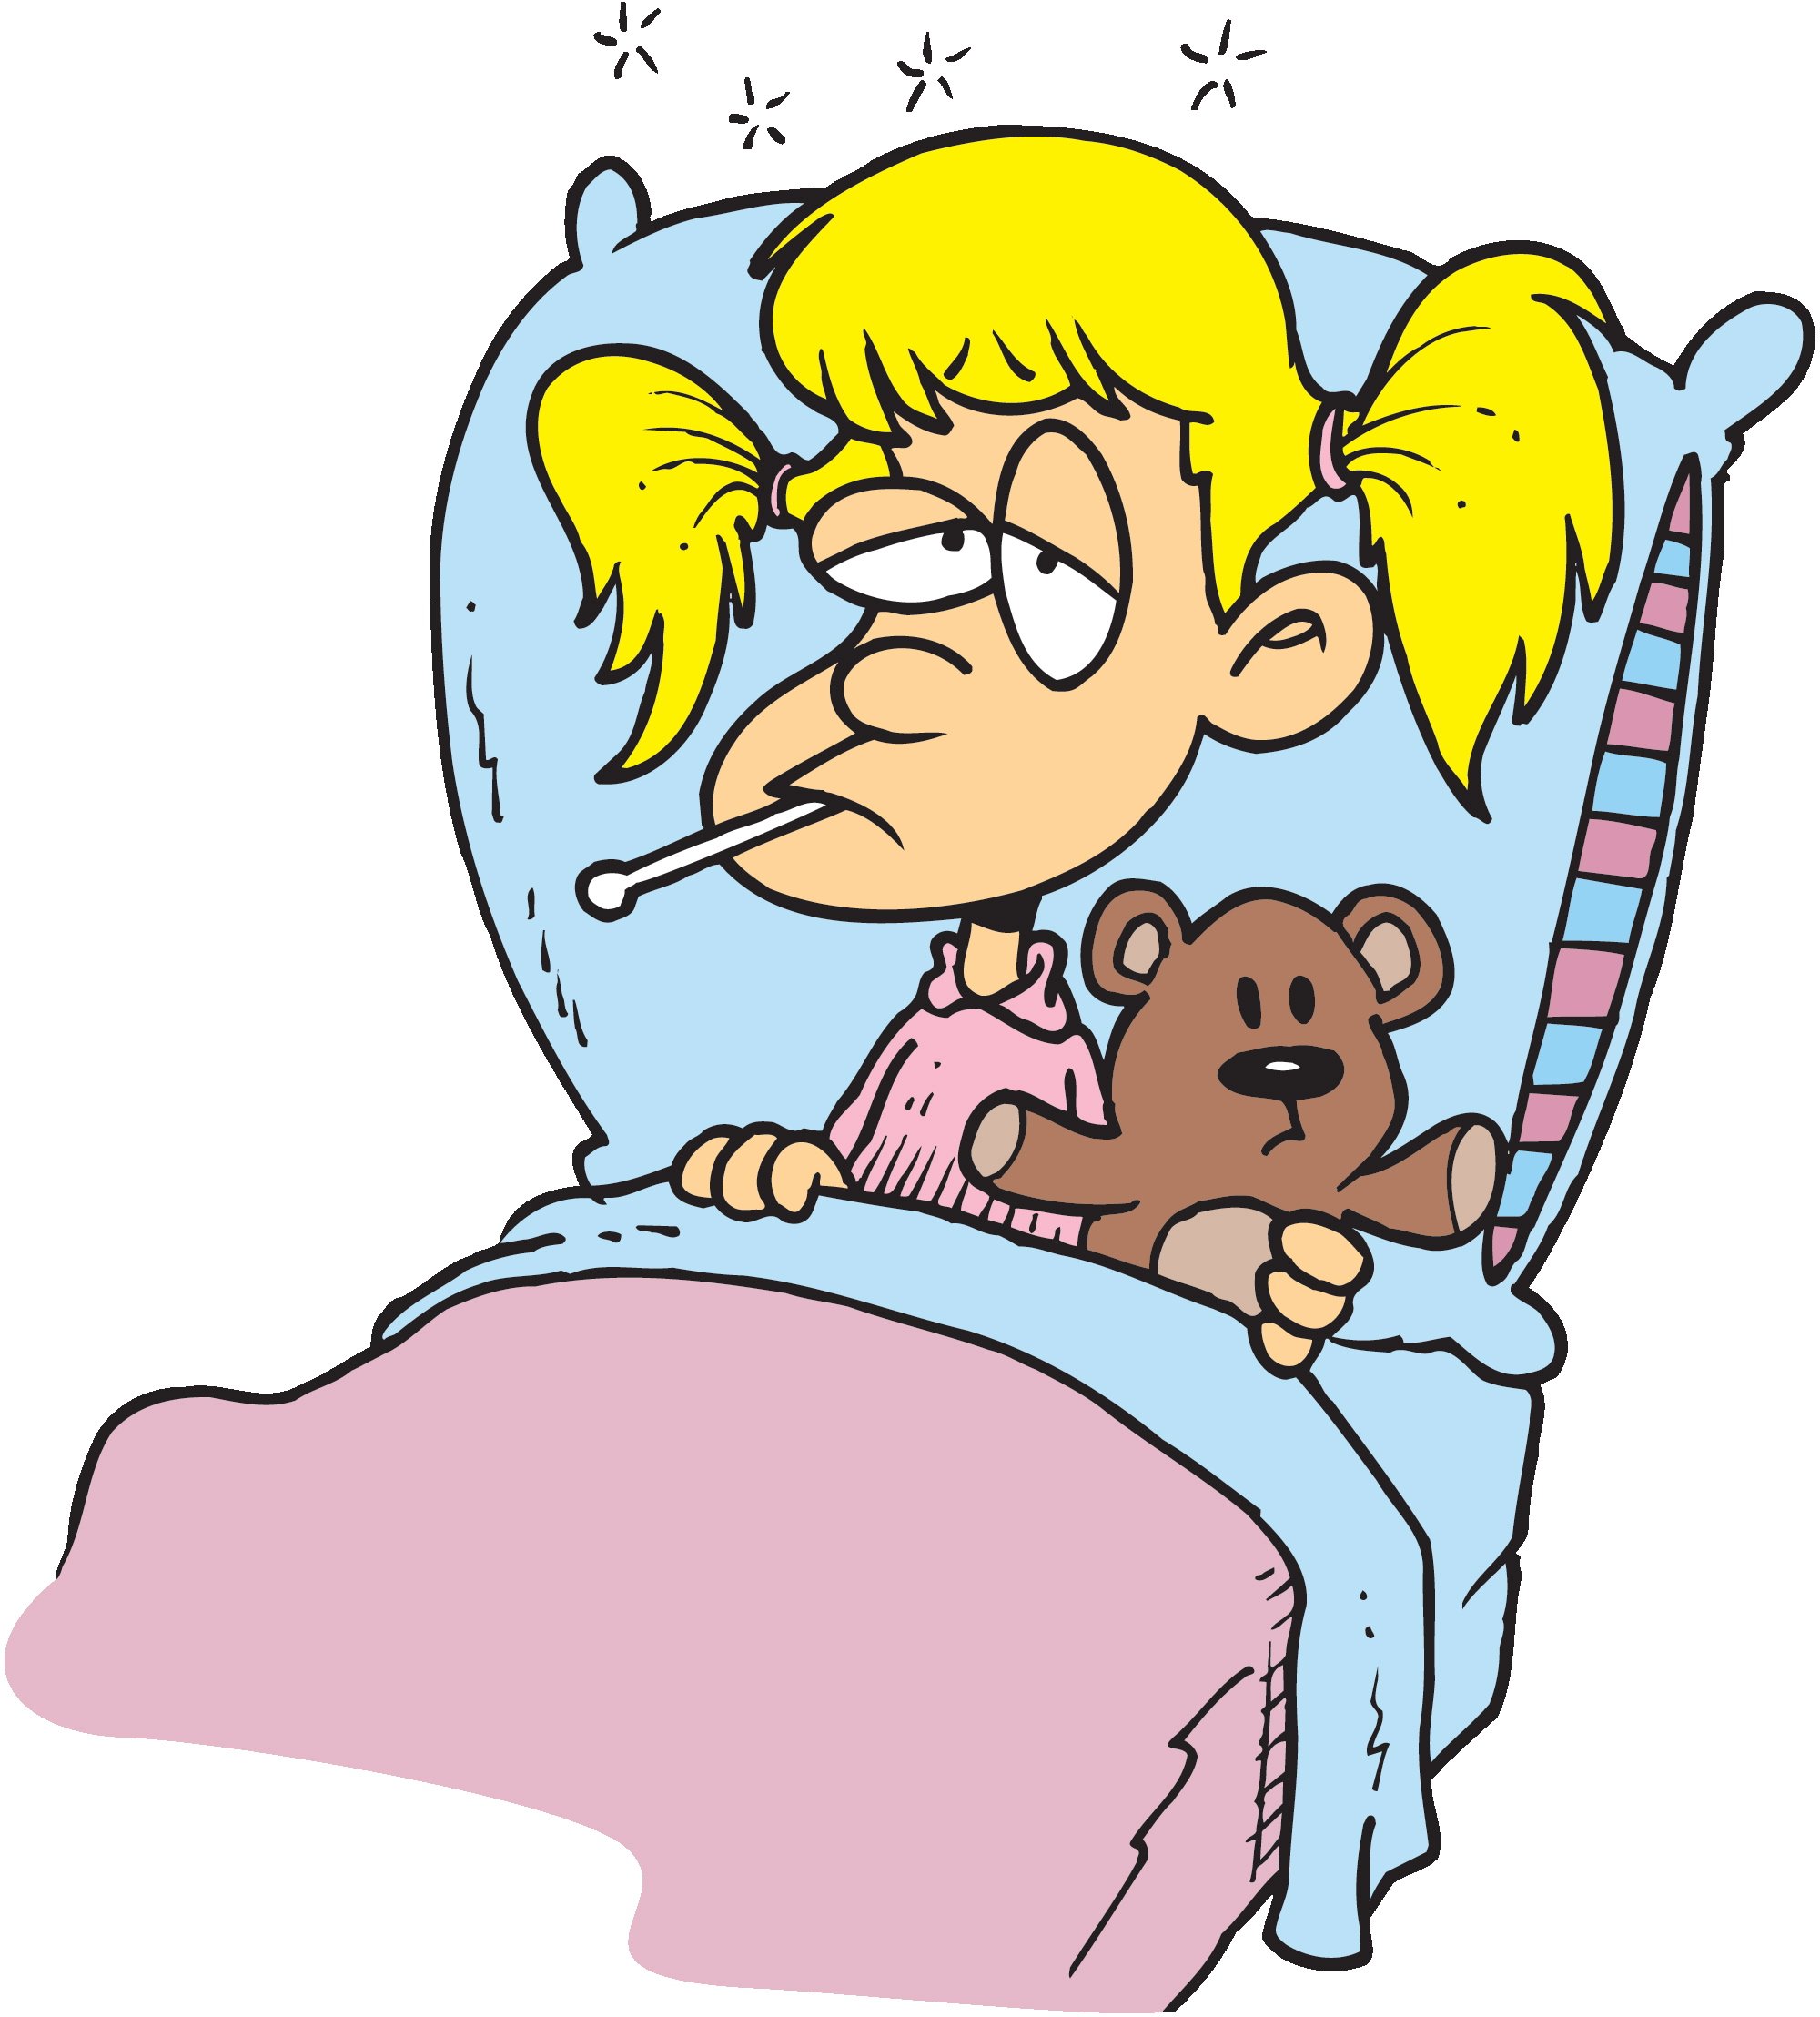 Hd Sick Person In Hospital Bed Cartoon Illustration Clip Art Library